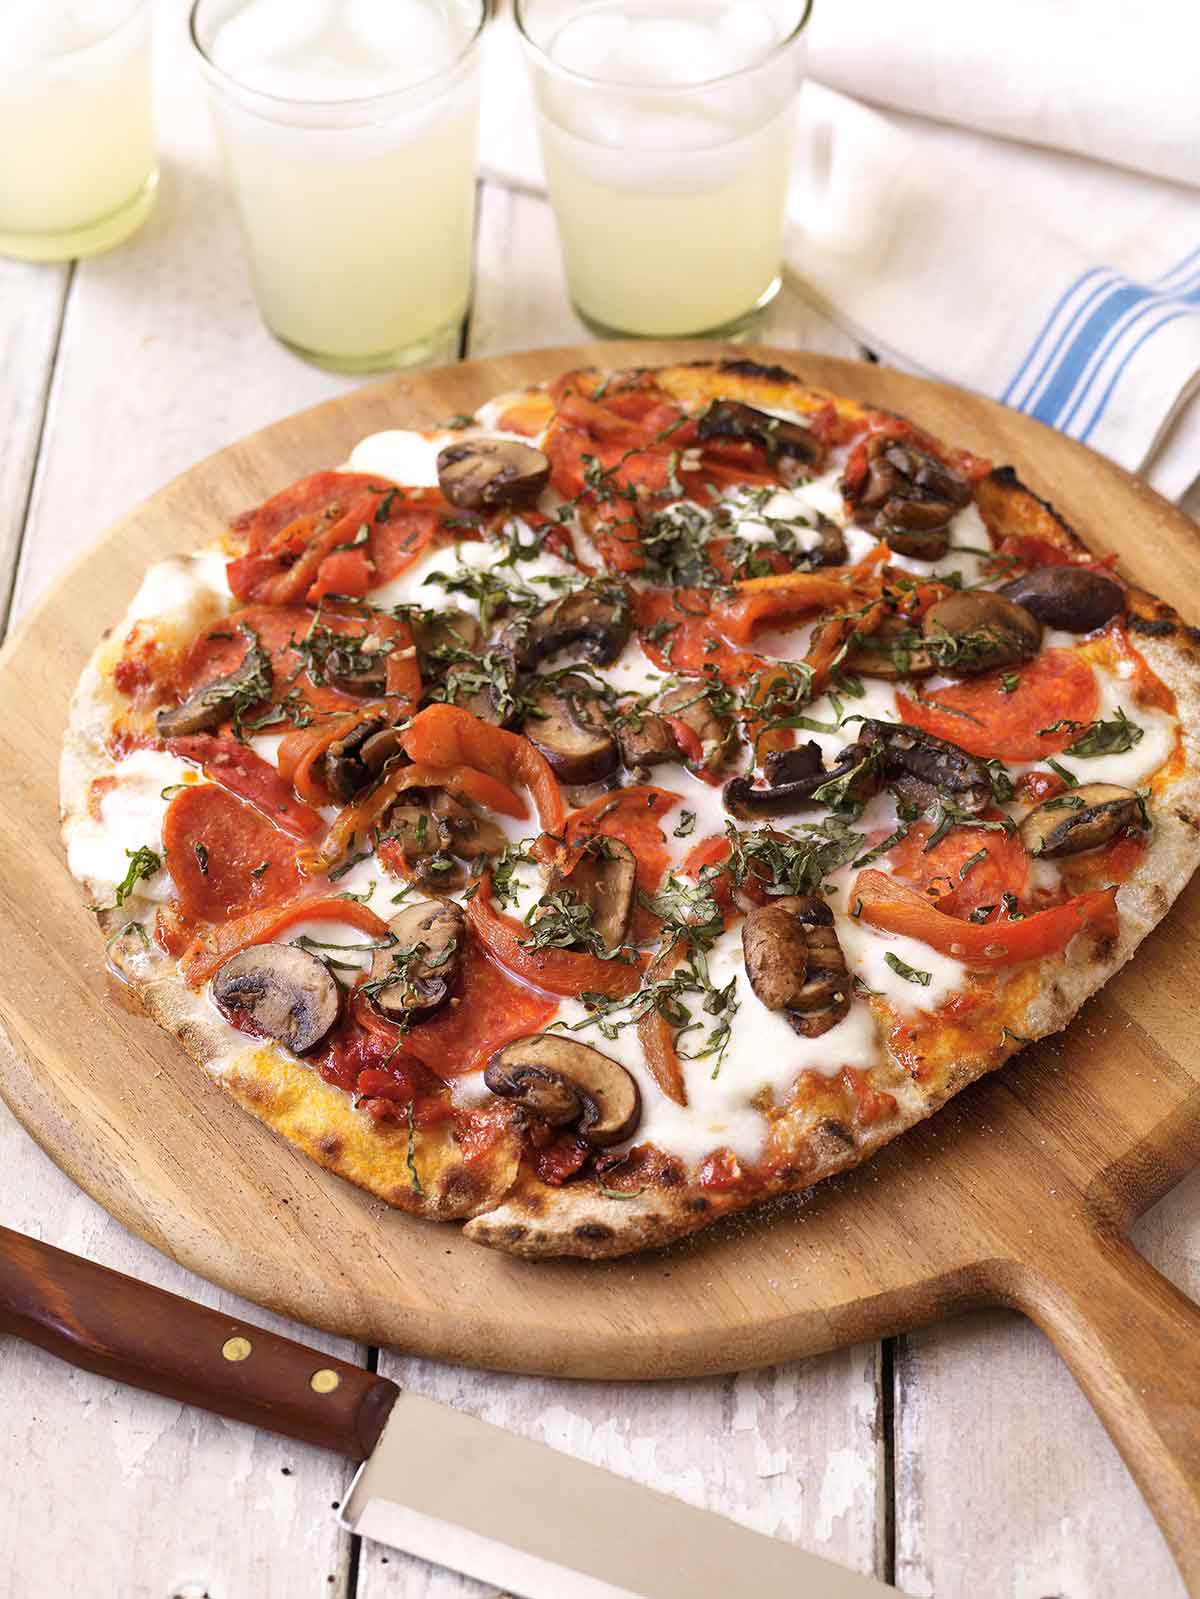 Grilled pizza with mushrooms and pepperoni is a terrific outdoor dinner